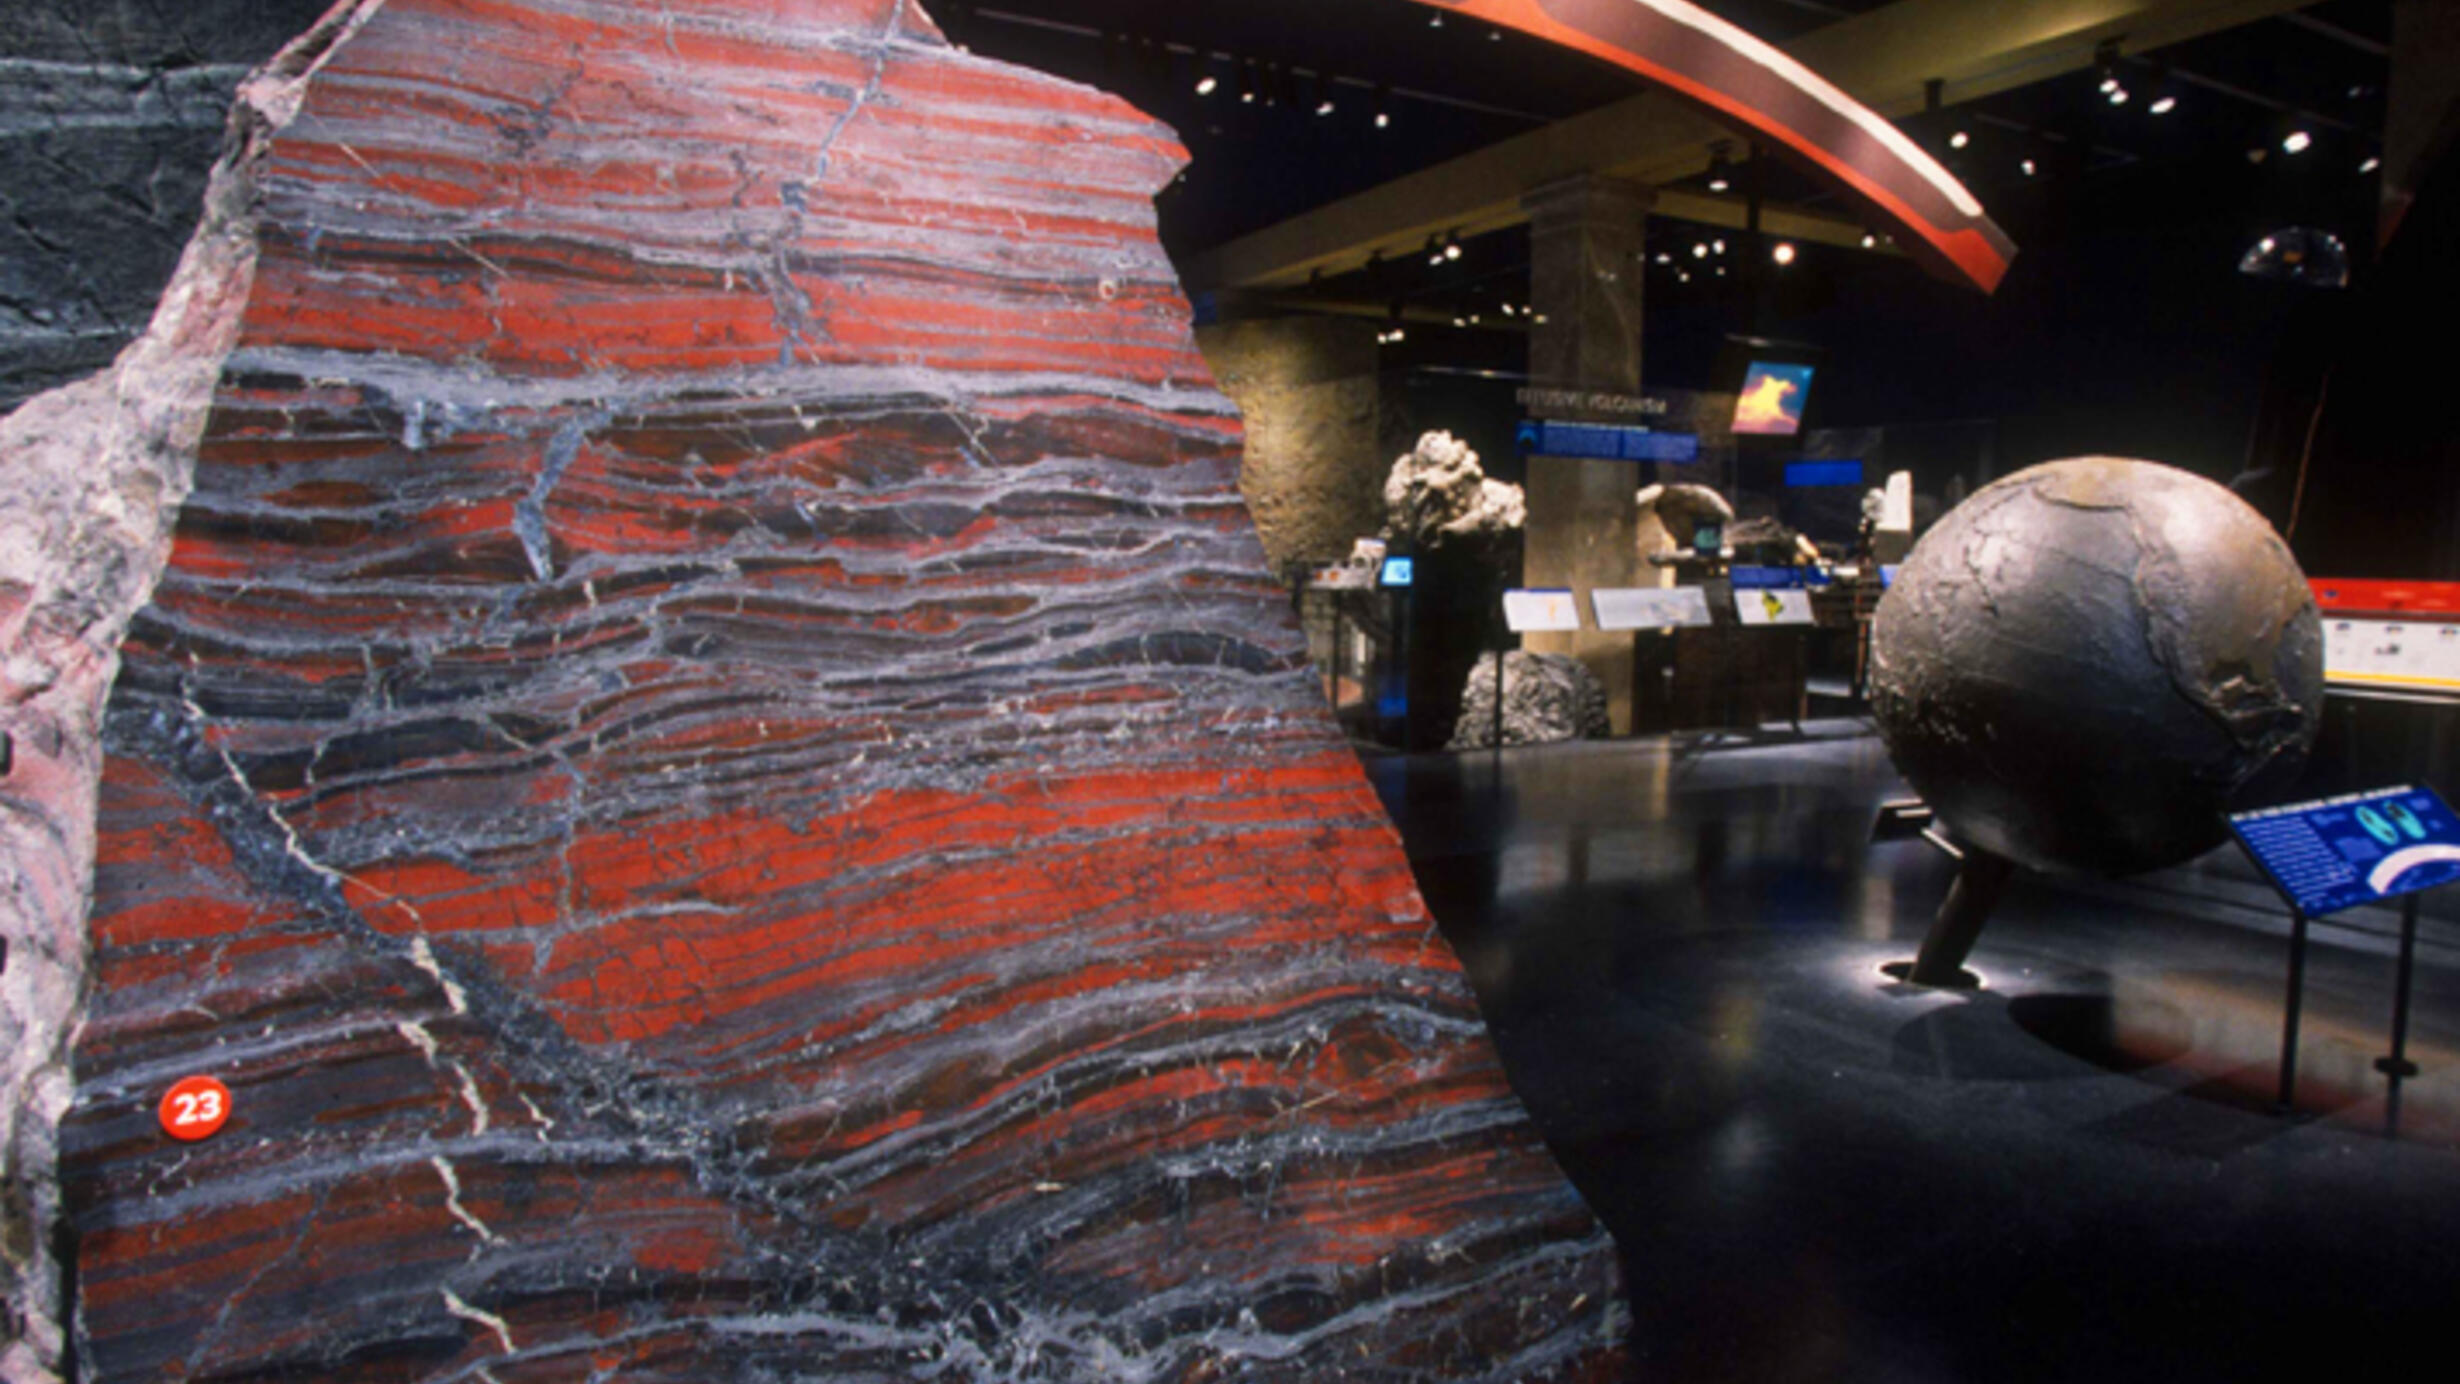 A large red-and-grey banded iron formation in a Museum hall.